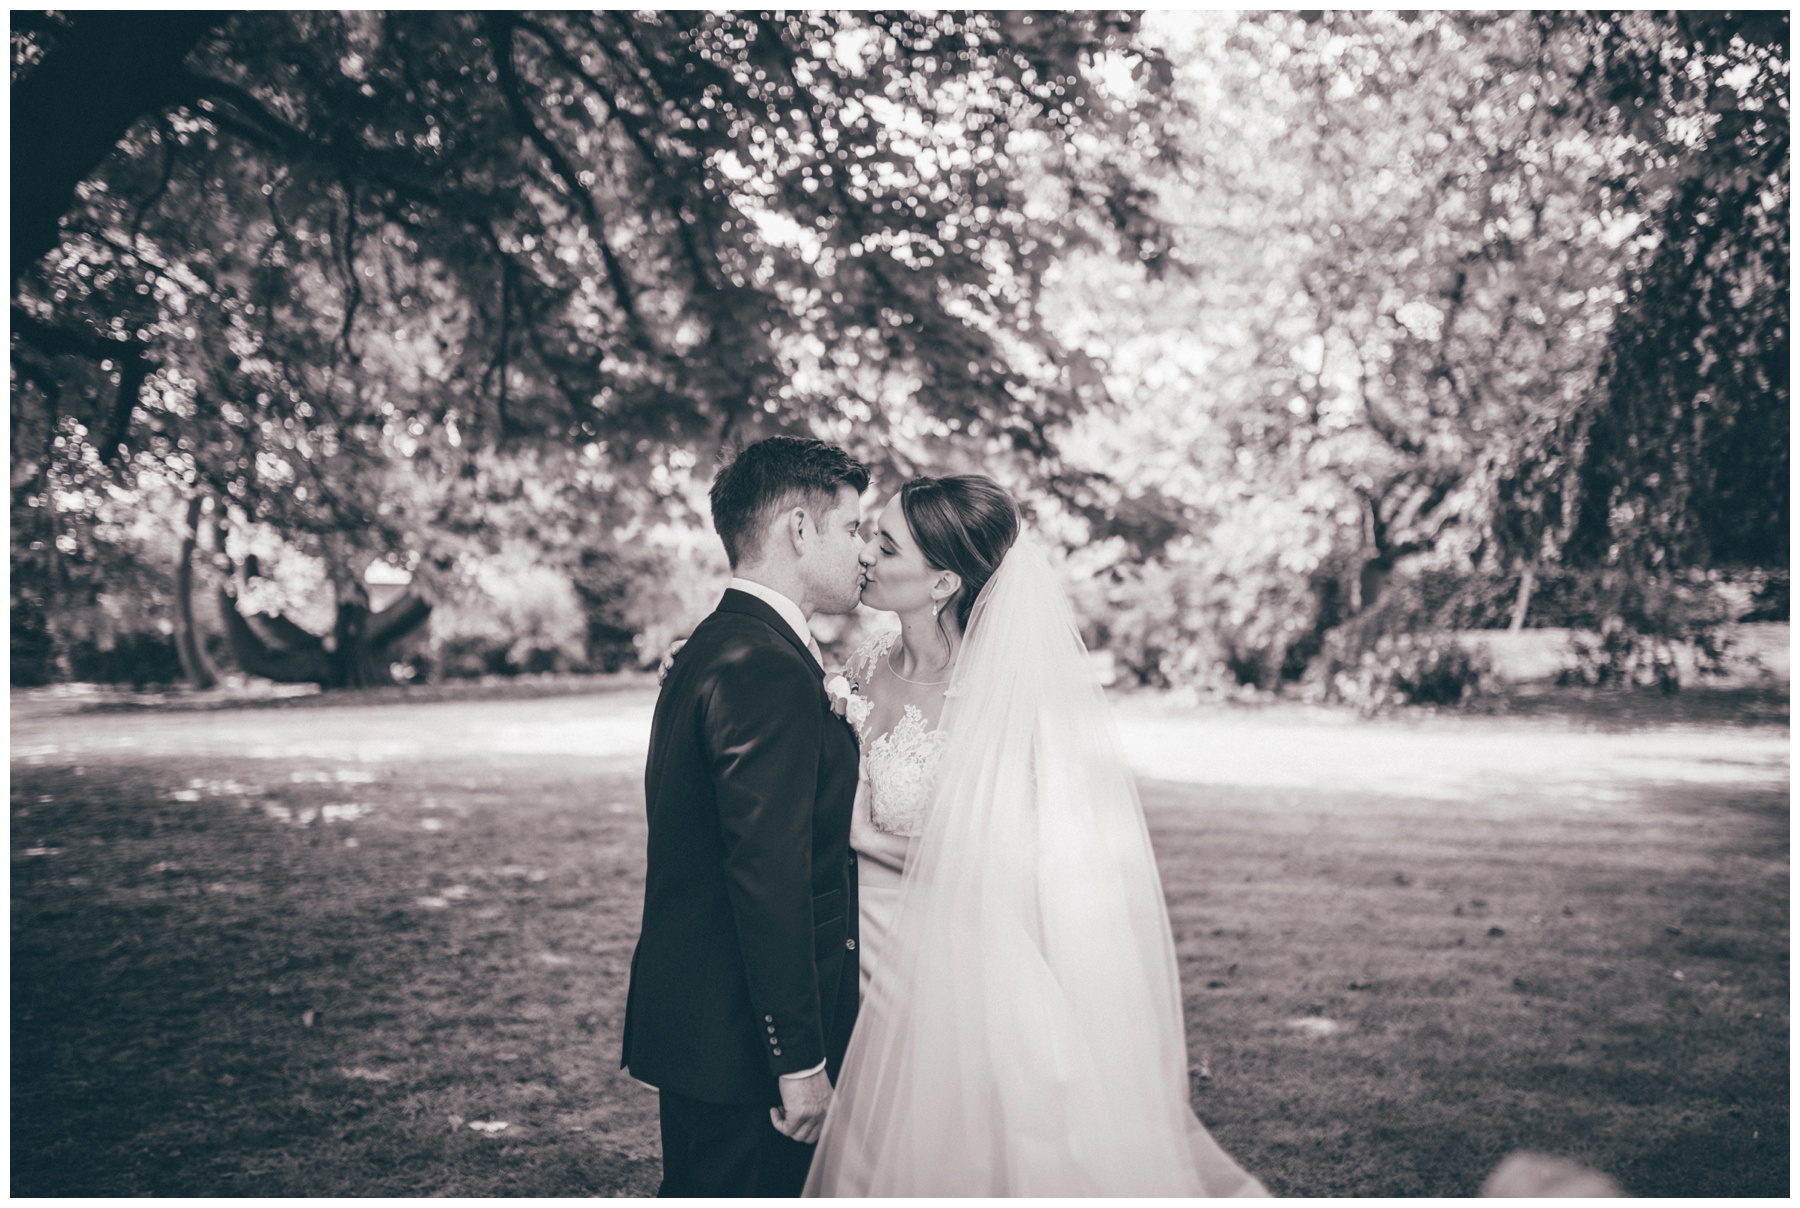 Bride and Groom in the beautiful gardens at Tilstone House in Cheshire.